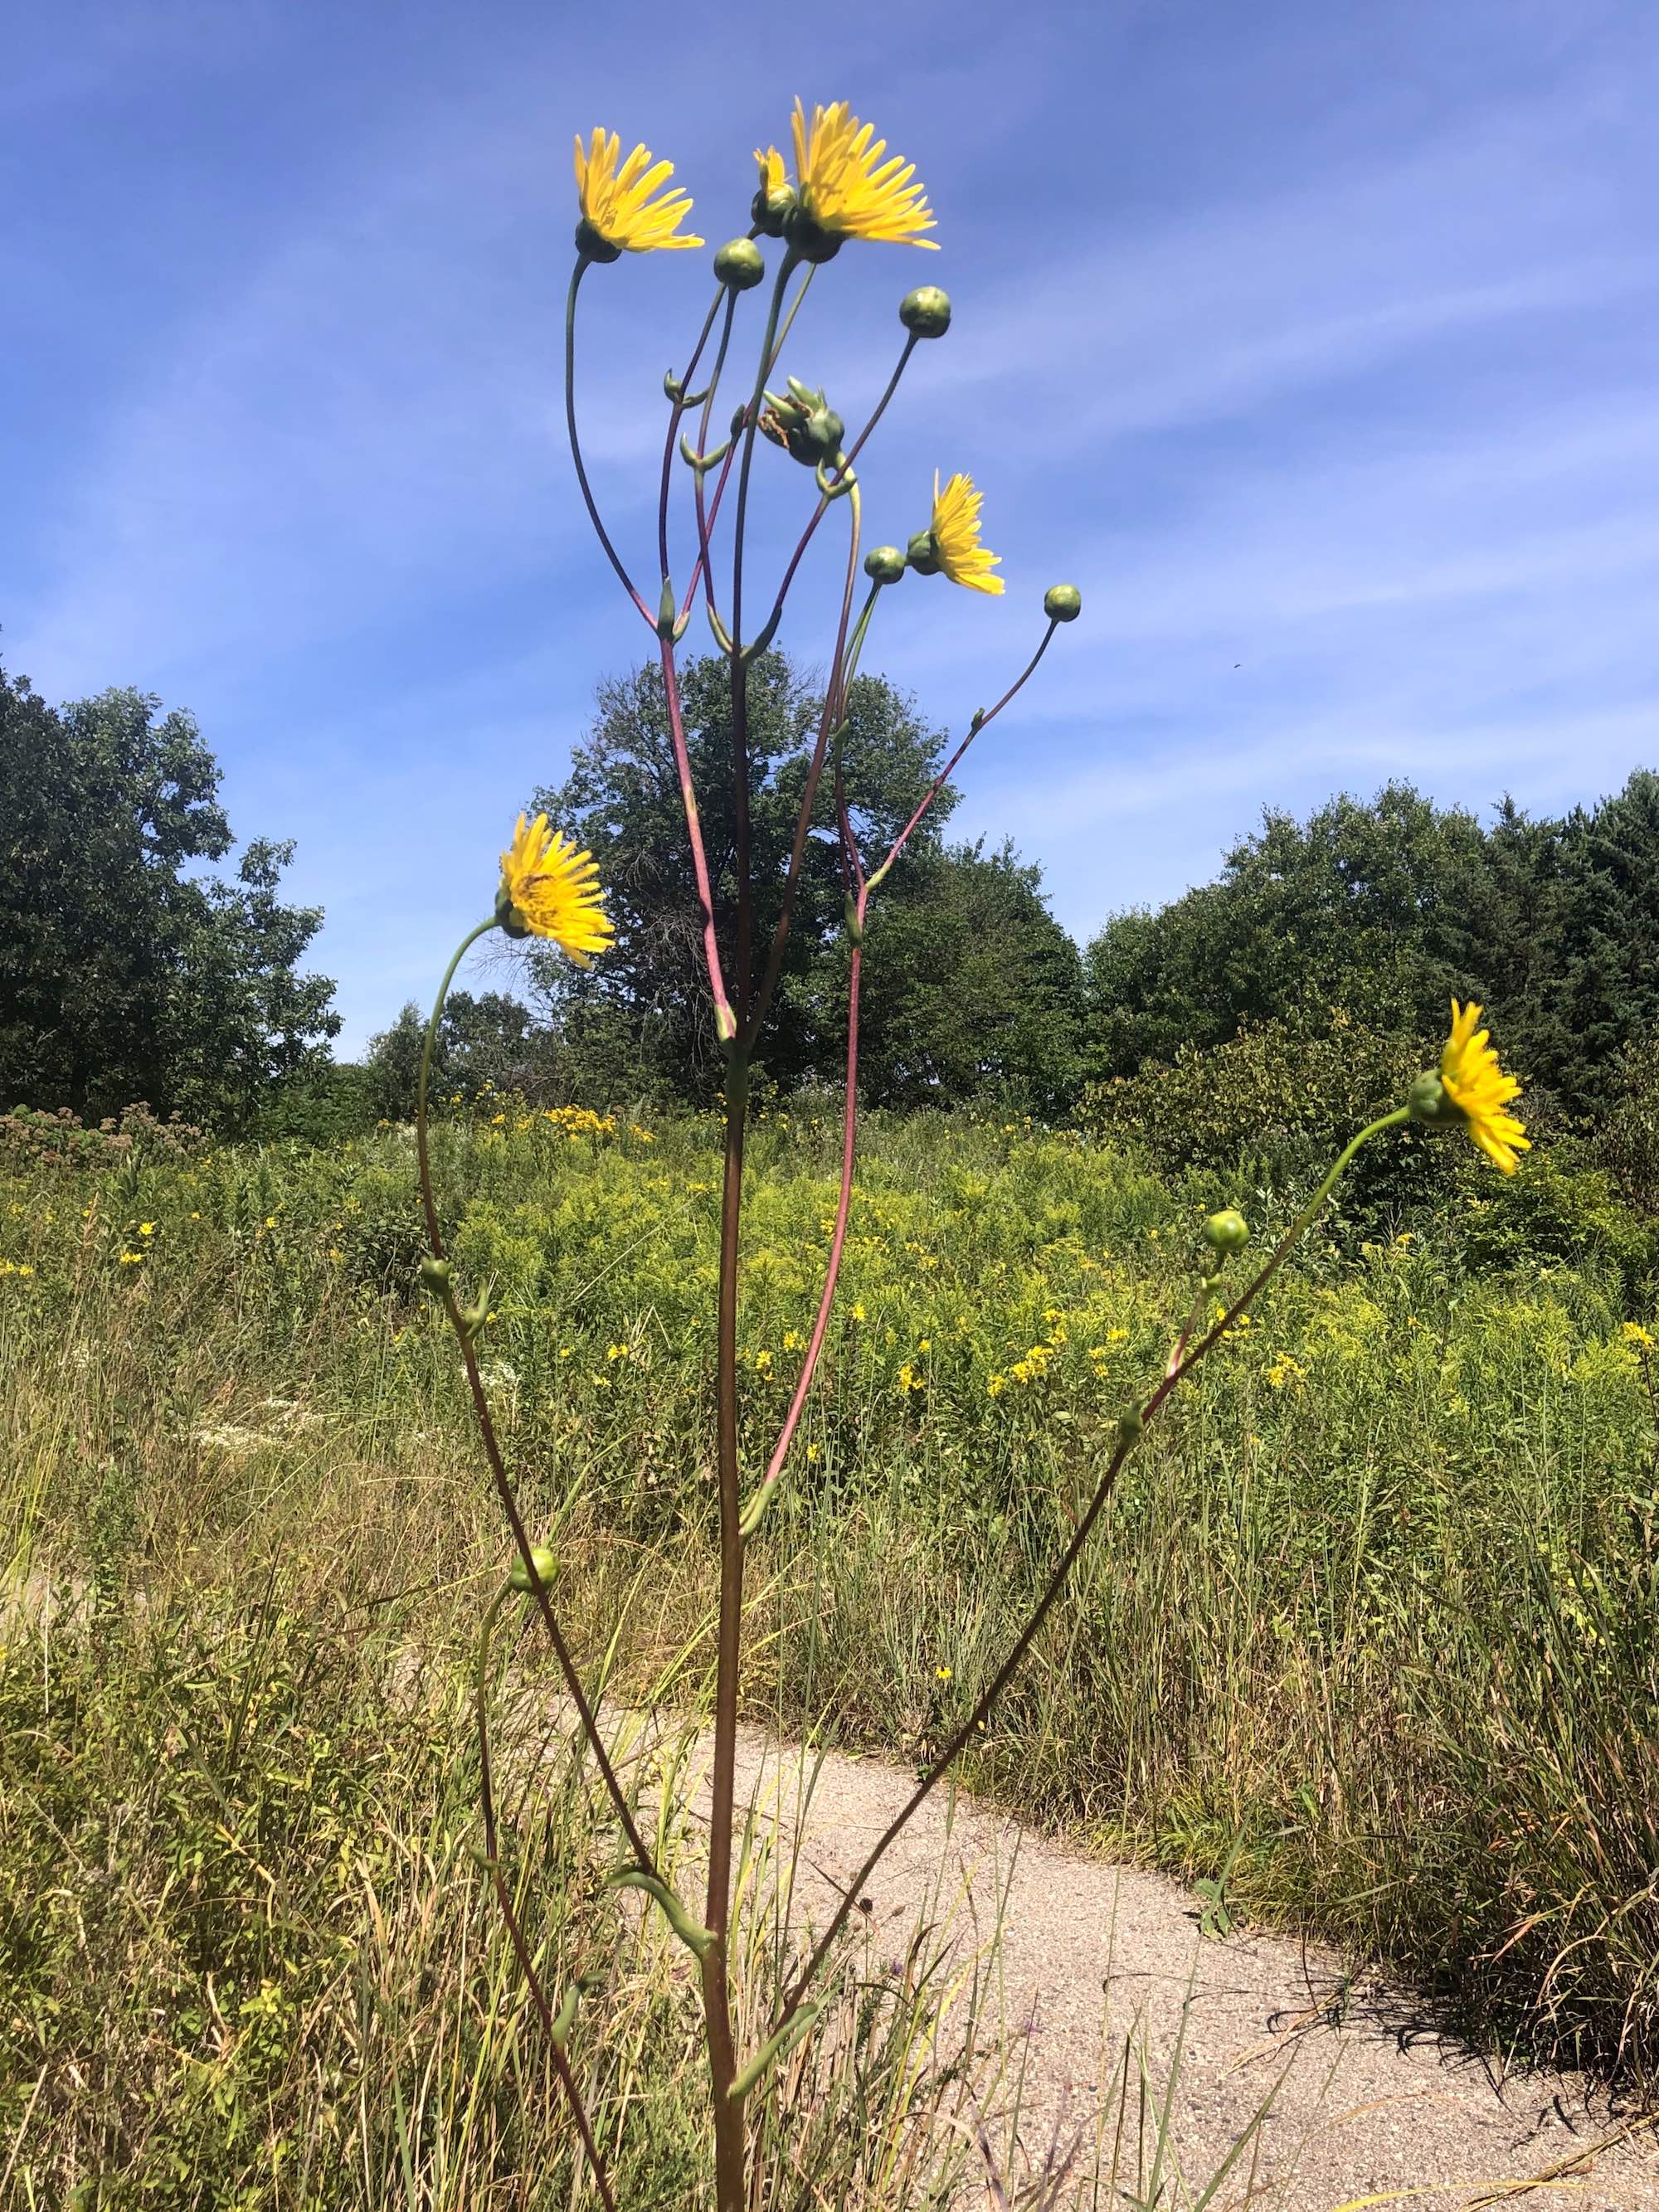 Basal-leaved  Rosinweed in the UW-Madison Arborteum in Madison, Wisconsin on August 20, 2020.